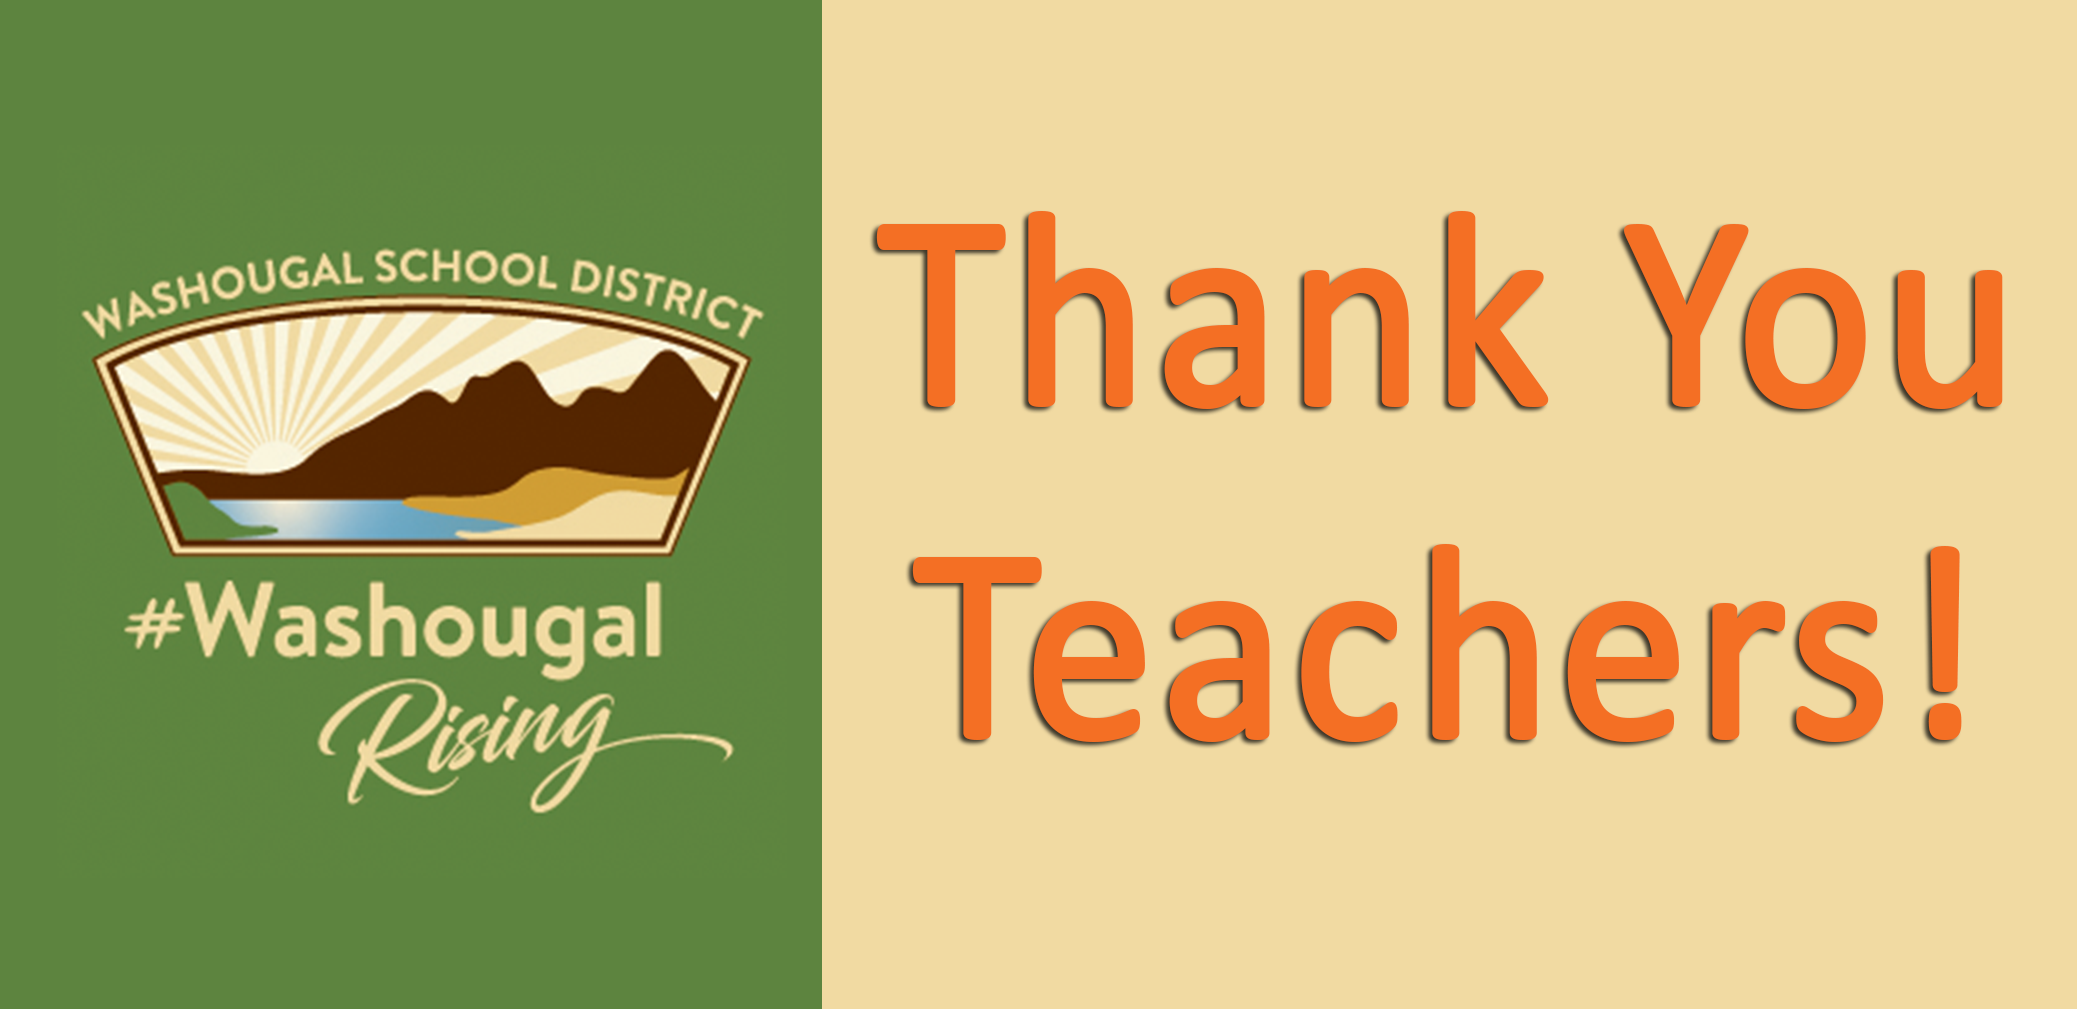 Thank you teachers with WSD Logo and Washougal Rising